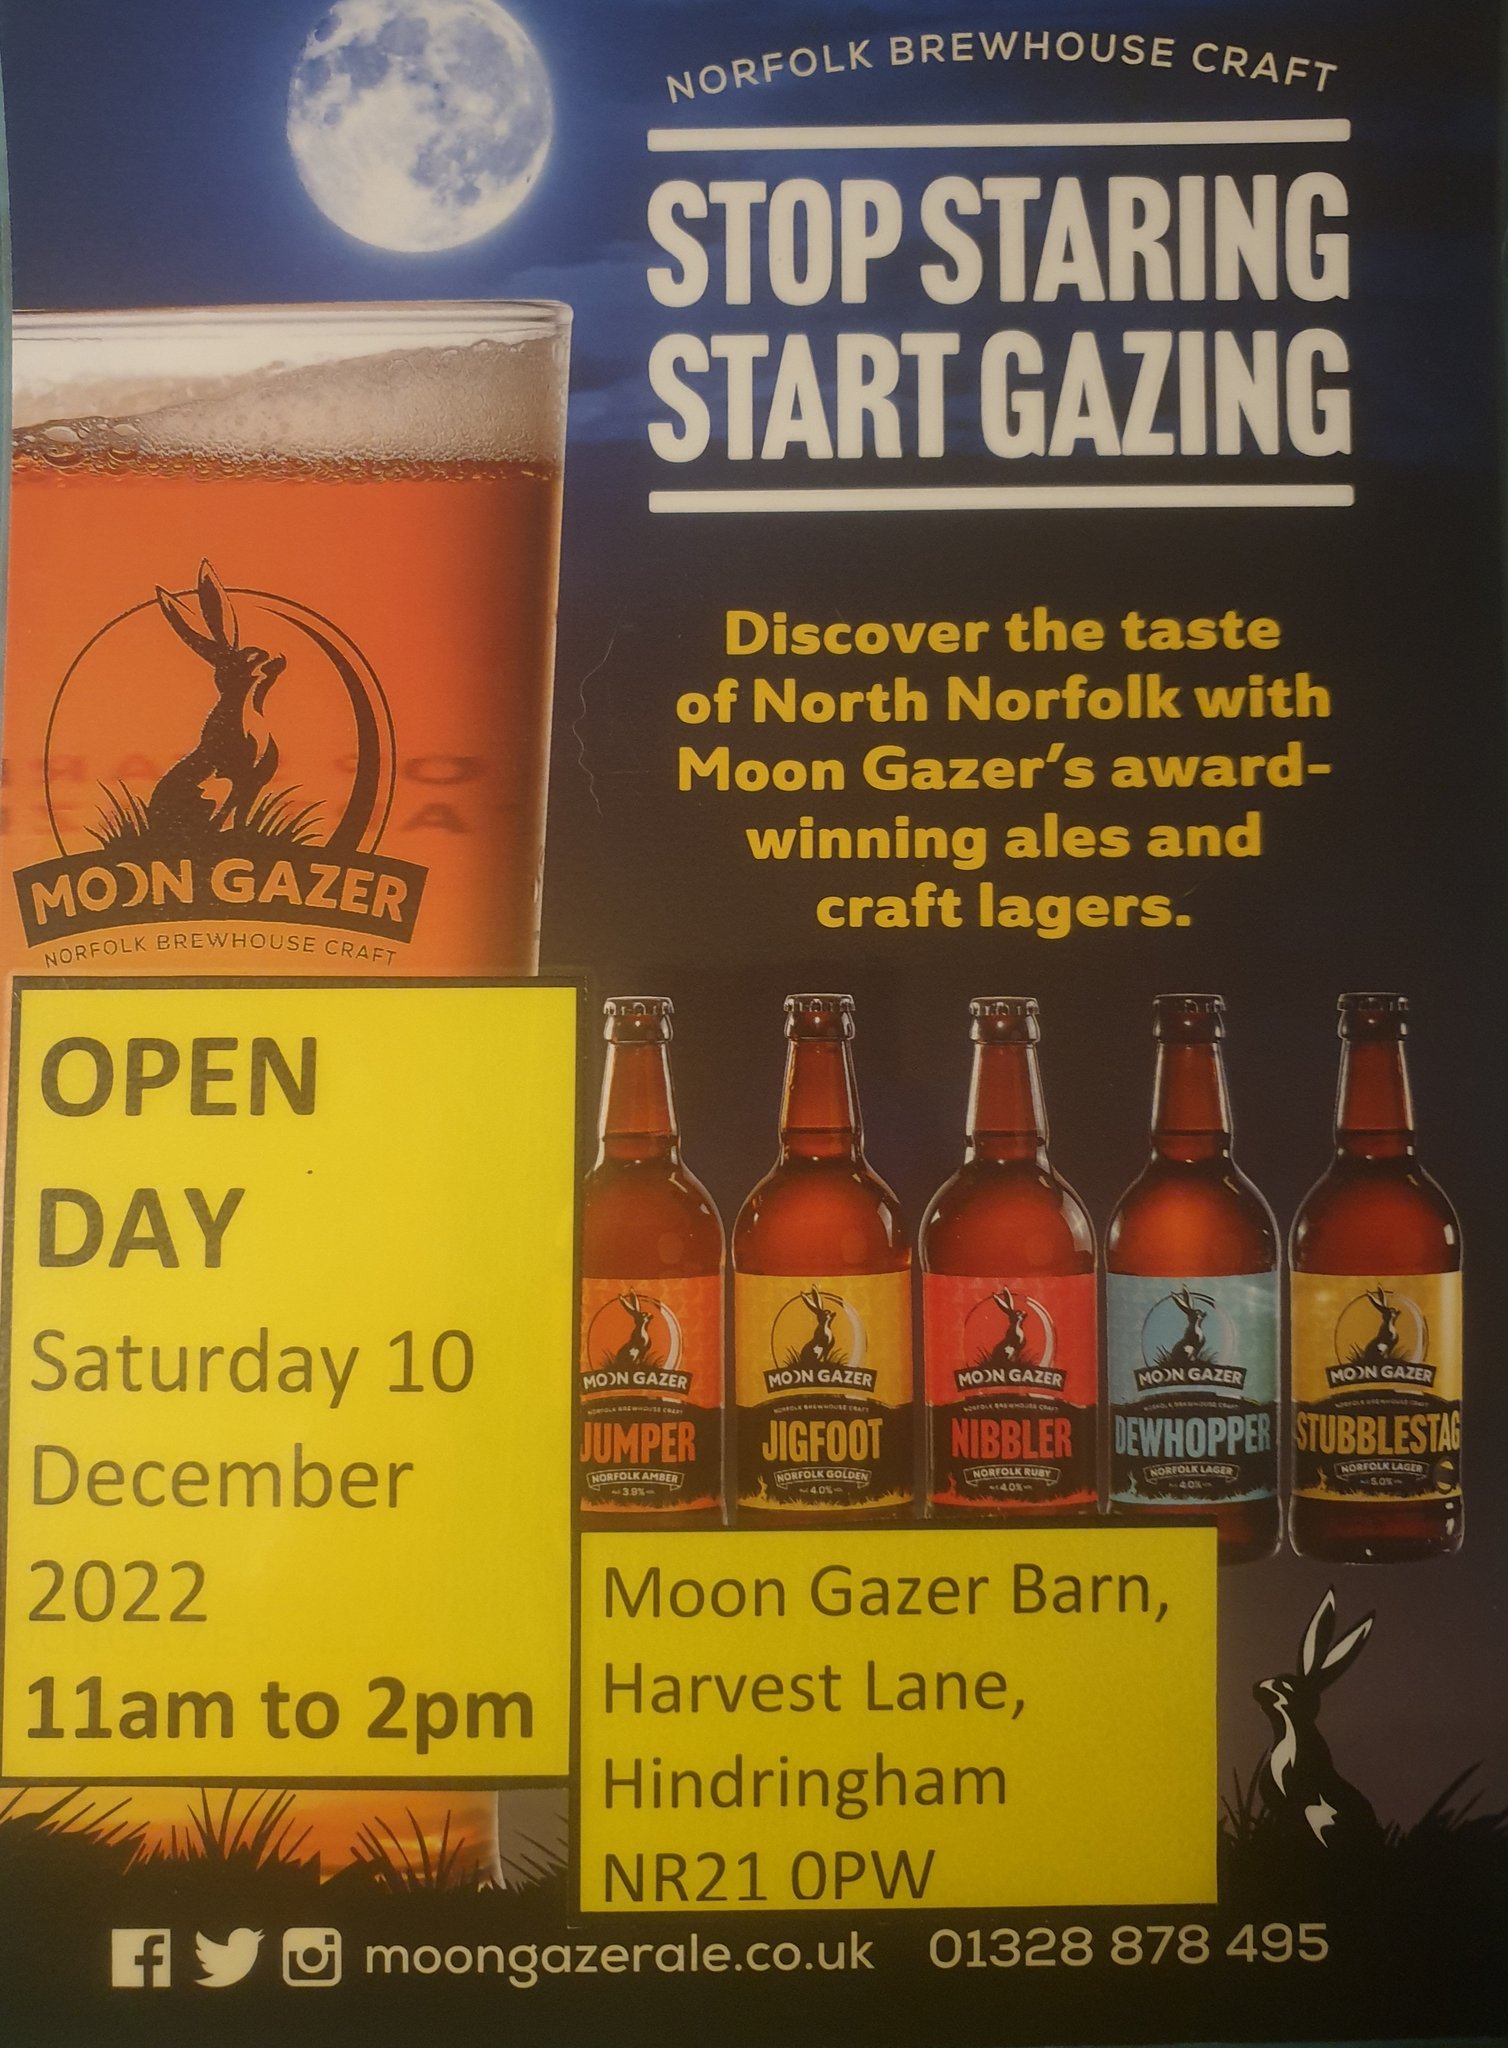 Moon Gazer Ale - Open Day, Moon Gazer Barn, Harvest Lane, Hindringham, NR21 0PW | A wonderful opportunity to look around the Moon Gazer Ale brewery. You may have enjoyed their ales at our music events, now you can see how & where those beers are brewed! | moon, gazer, ale, open, day, brewery, brews, beer, lager